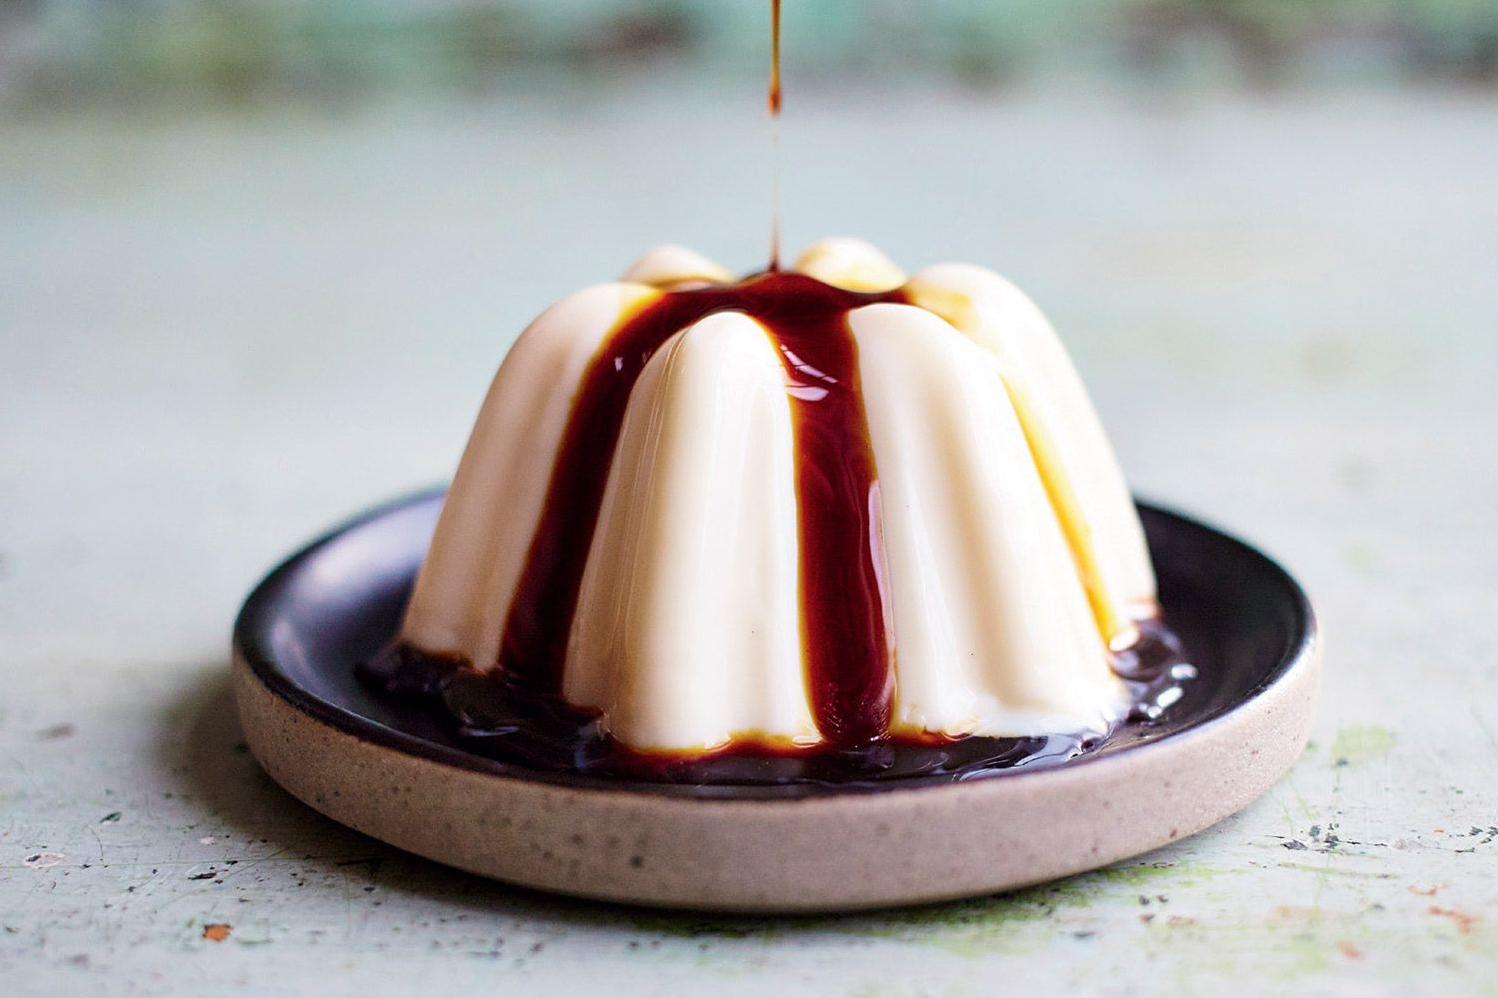  Coffeelicious goodness in every bite, Coffee Syrup Panna Cotta